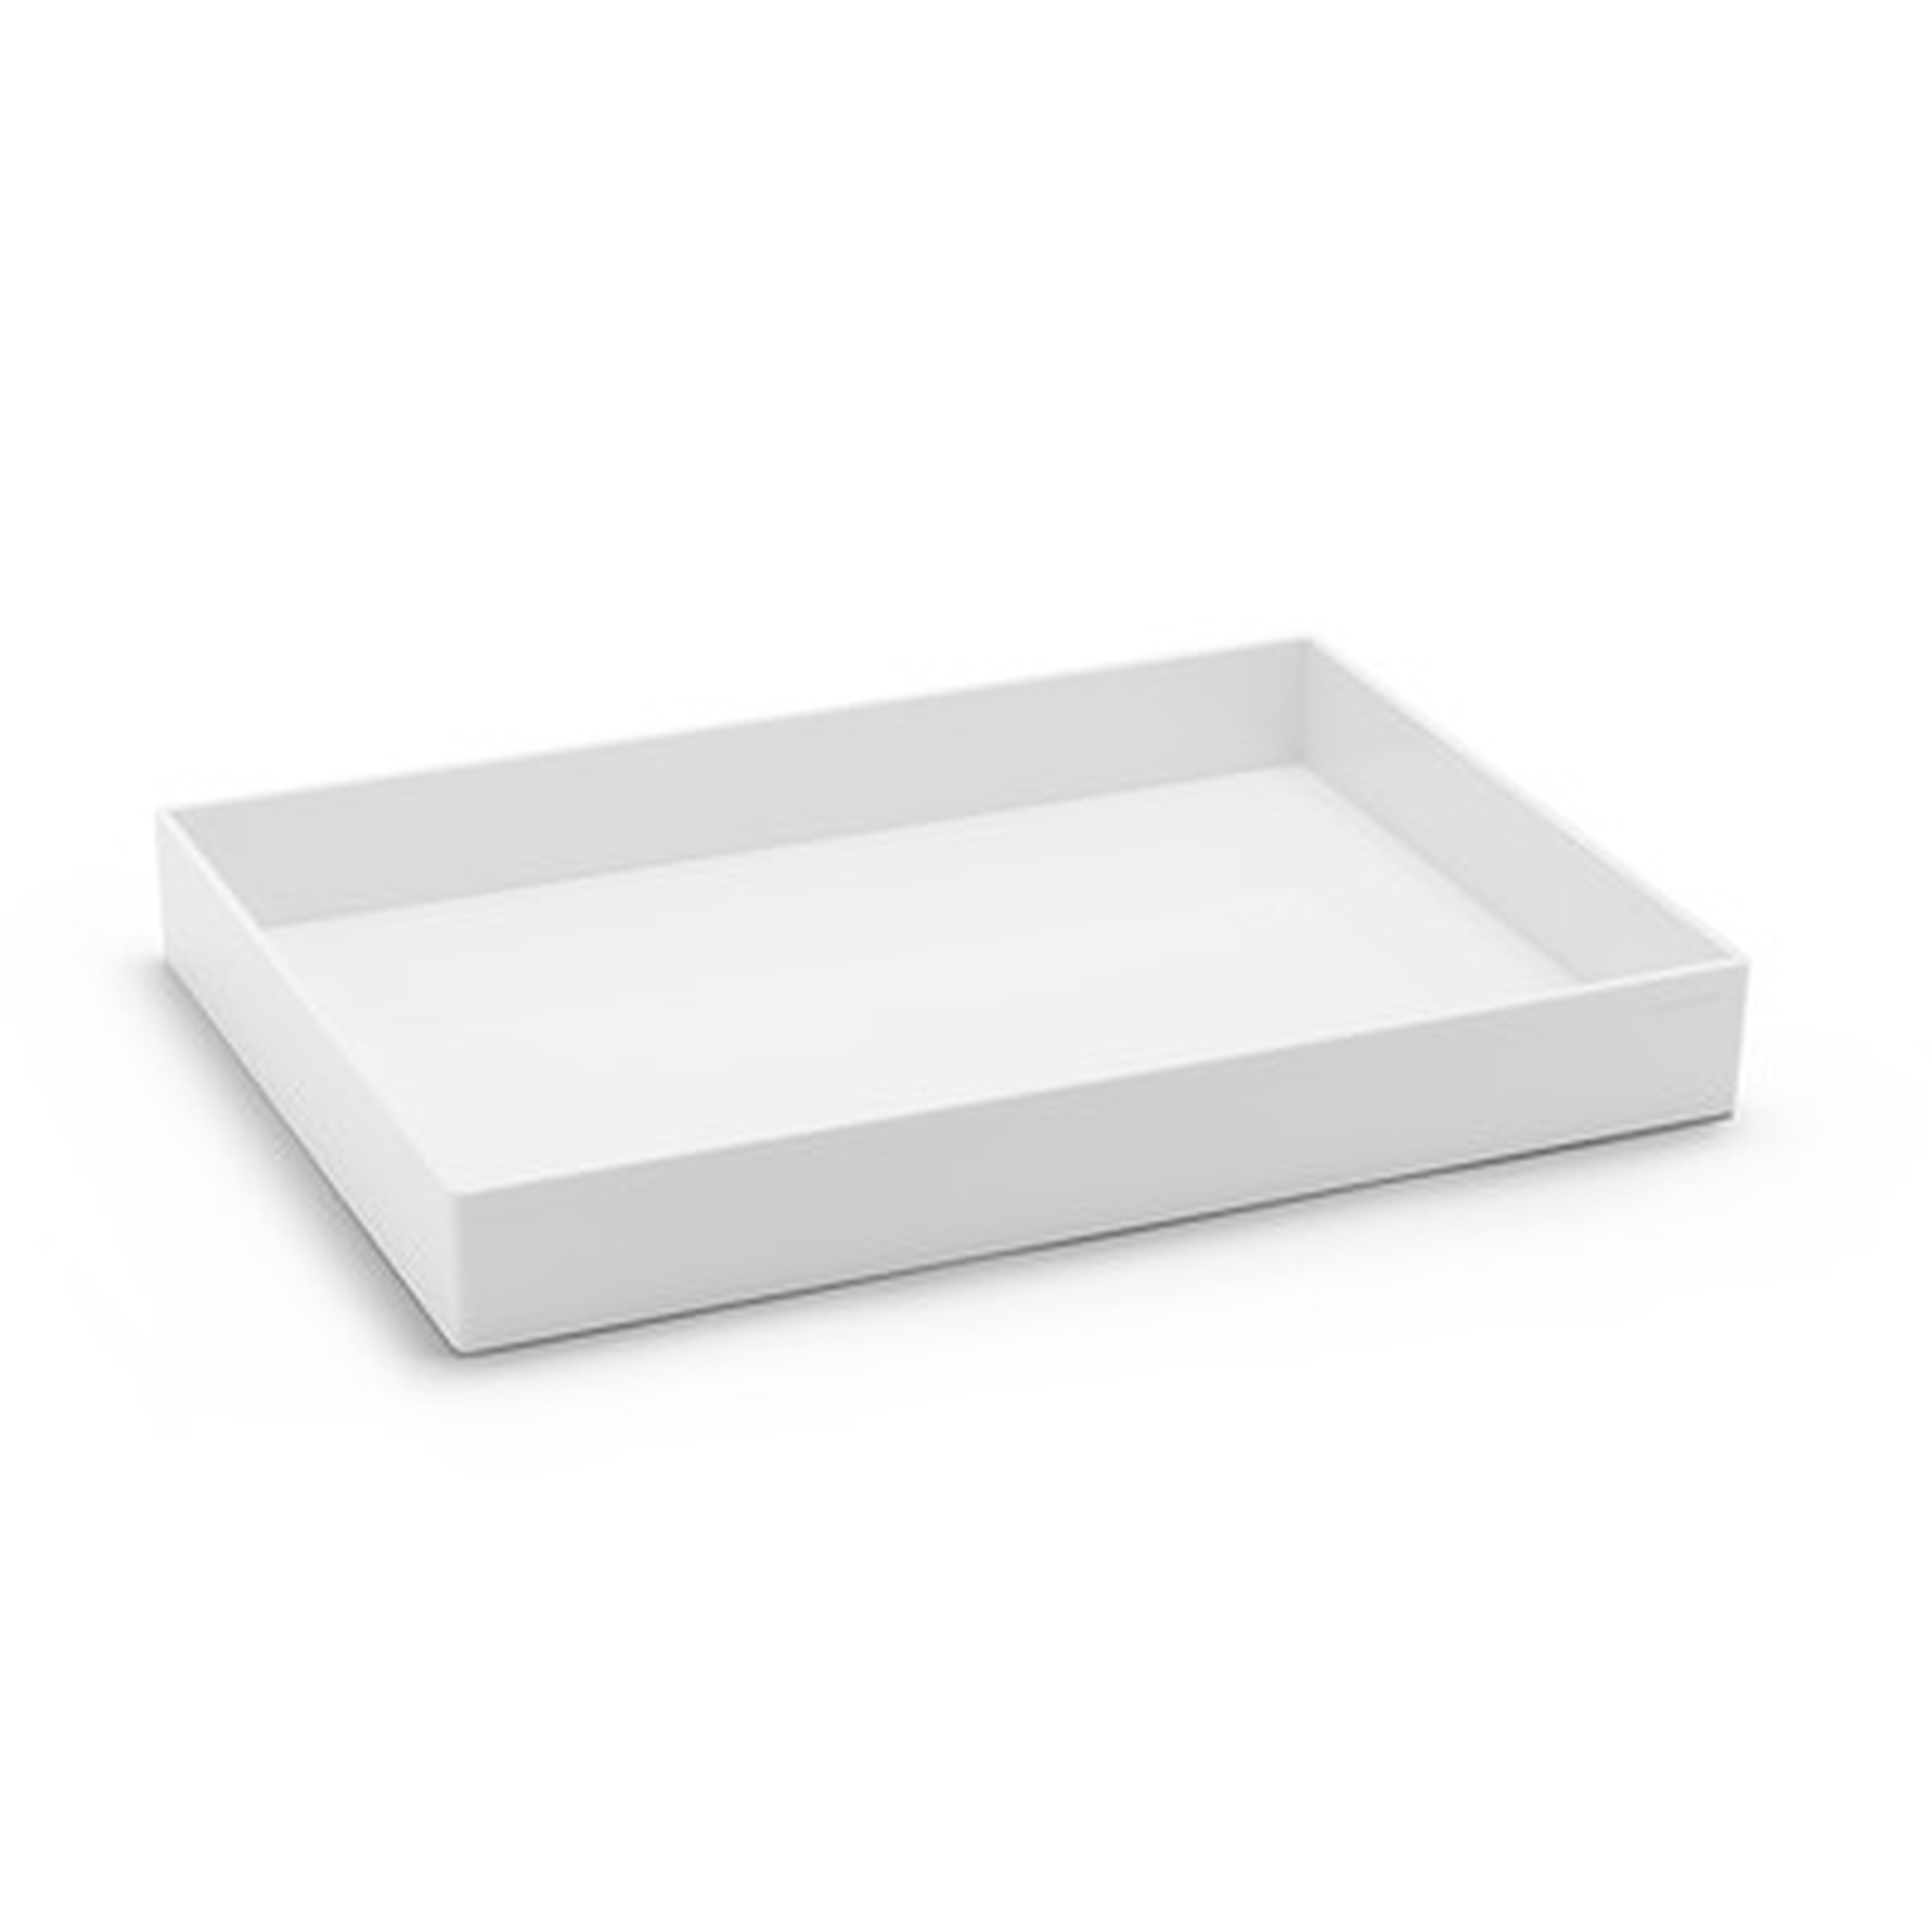 Large Accessory Tray - White - AllModern